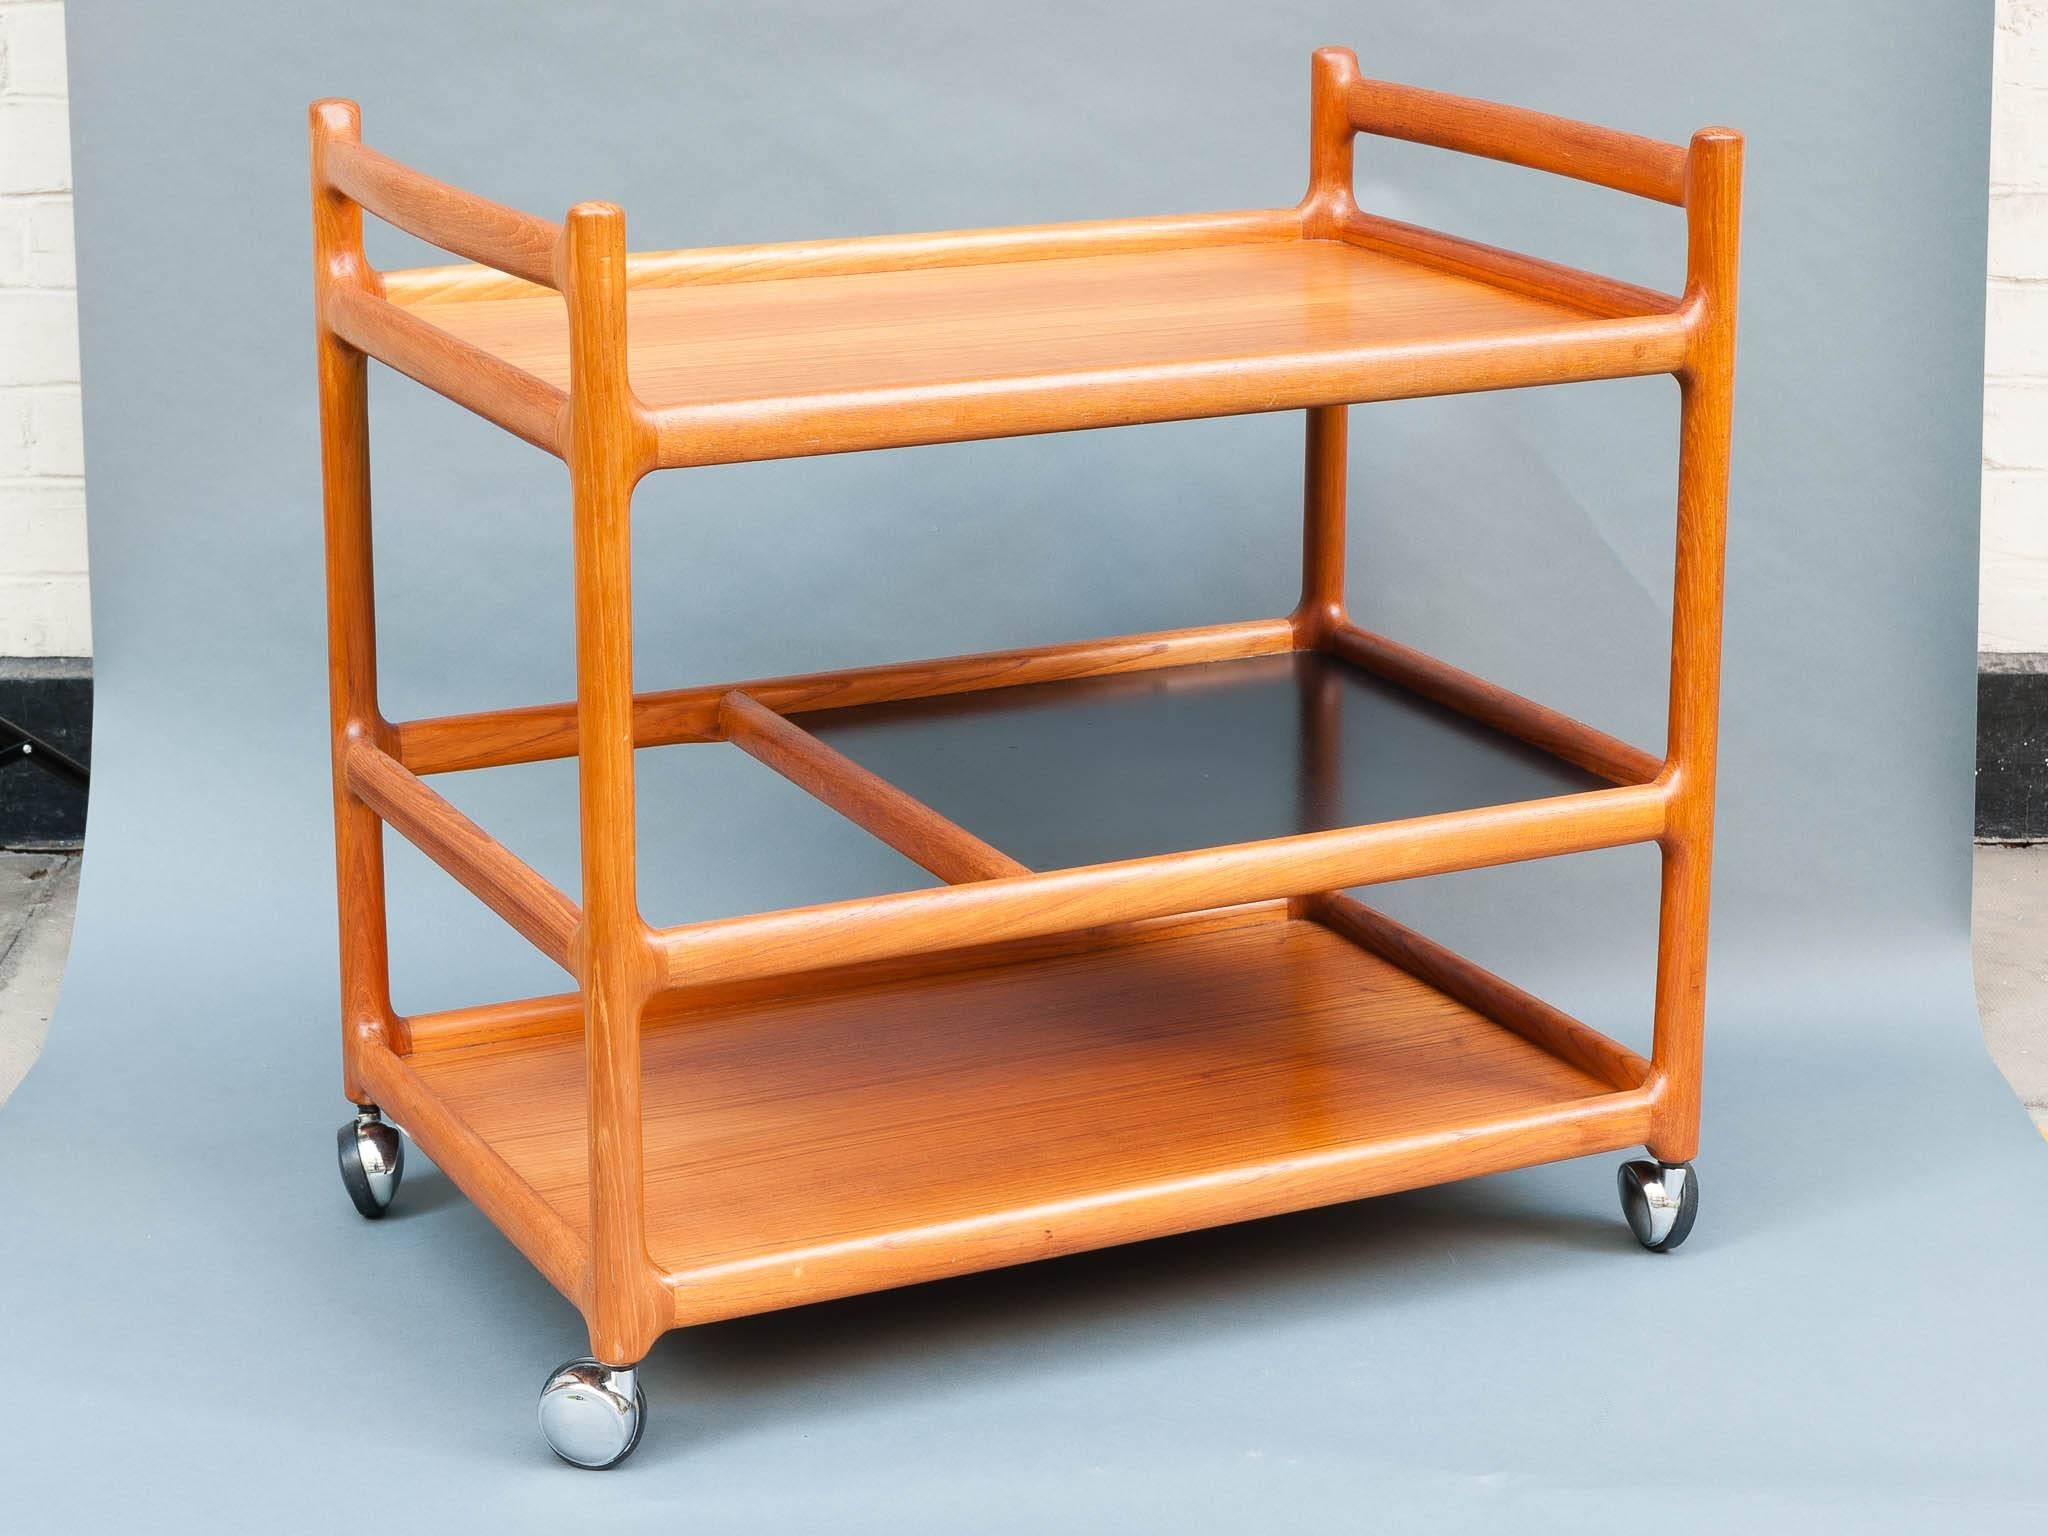 1960s Danish drinks trolley in a wonderful vintage condition designed by Johannes Andersen and manufactured by CFC Silkeborg Mobelfabrik. Made from solid teak and black laminate sitting on fully working chrome casters. A three-tiered trolley with a